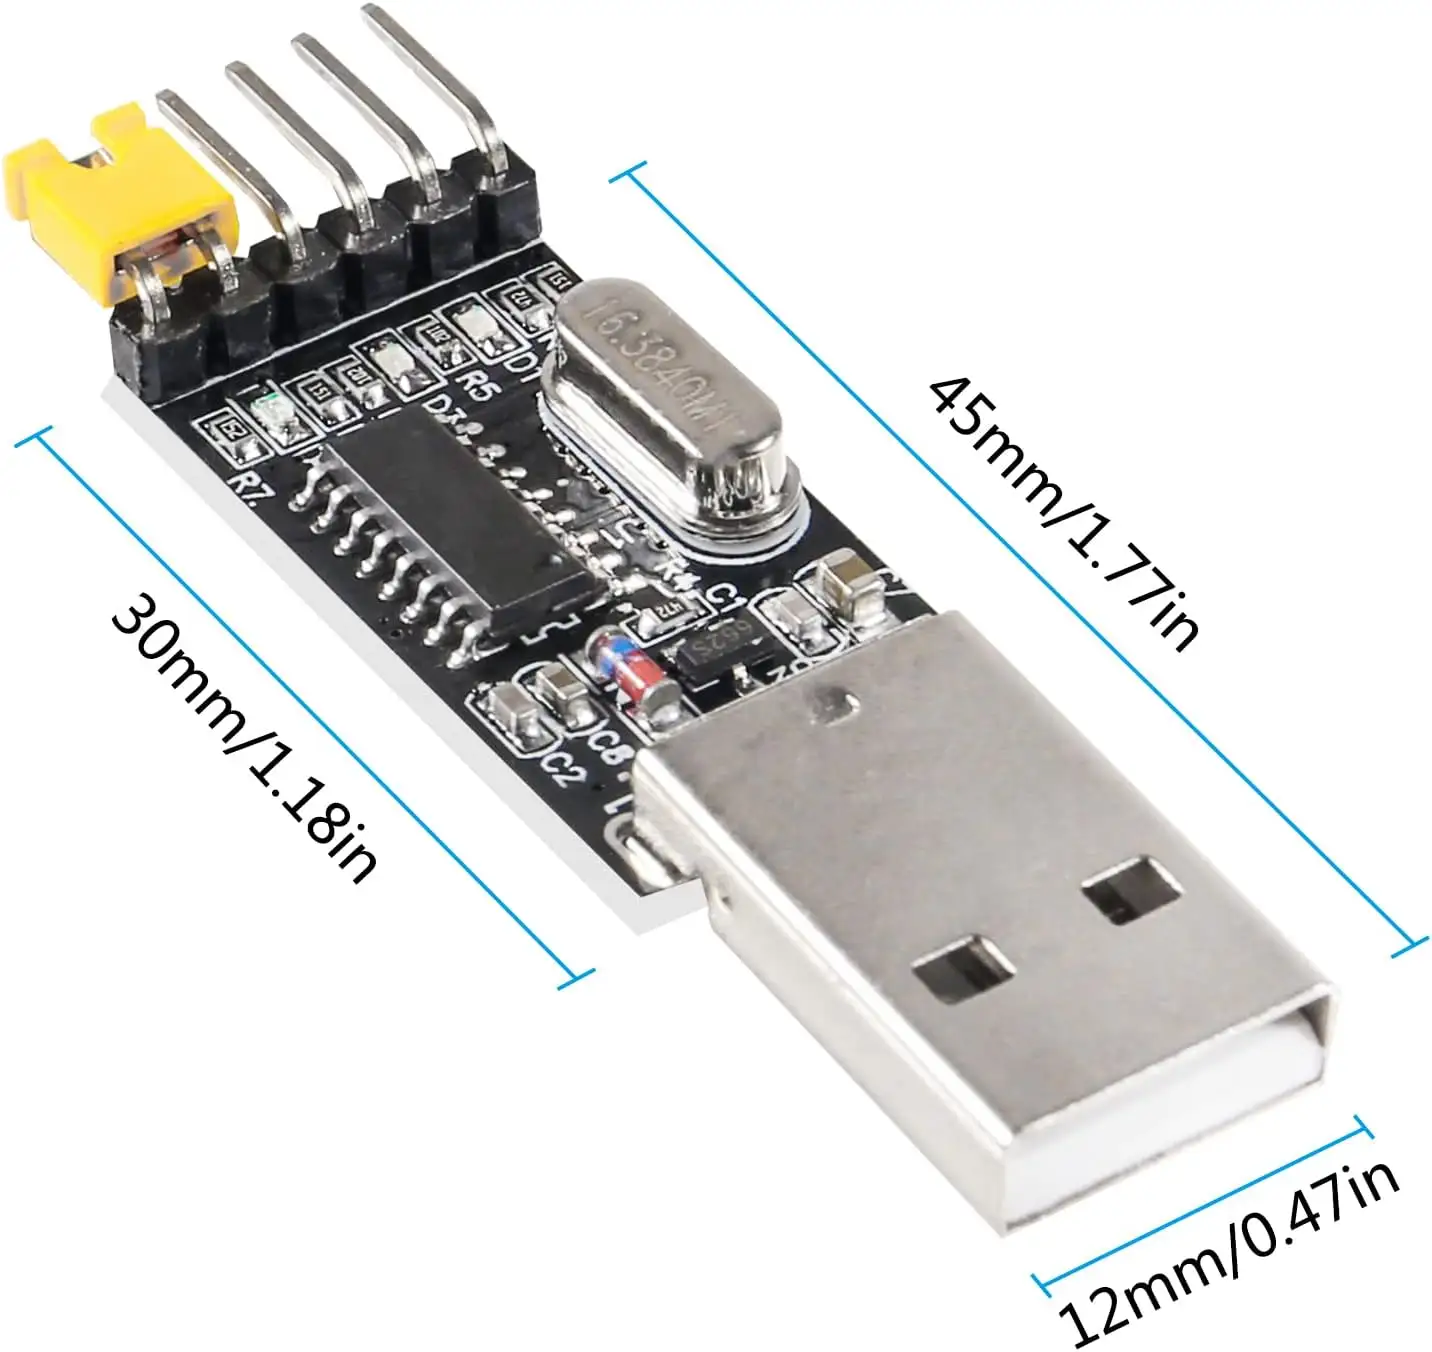 USB to TTL Serial Module CH340 Module to Serial Port Adapter Board for STC Microcontroller Download Module